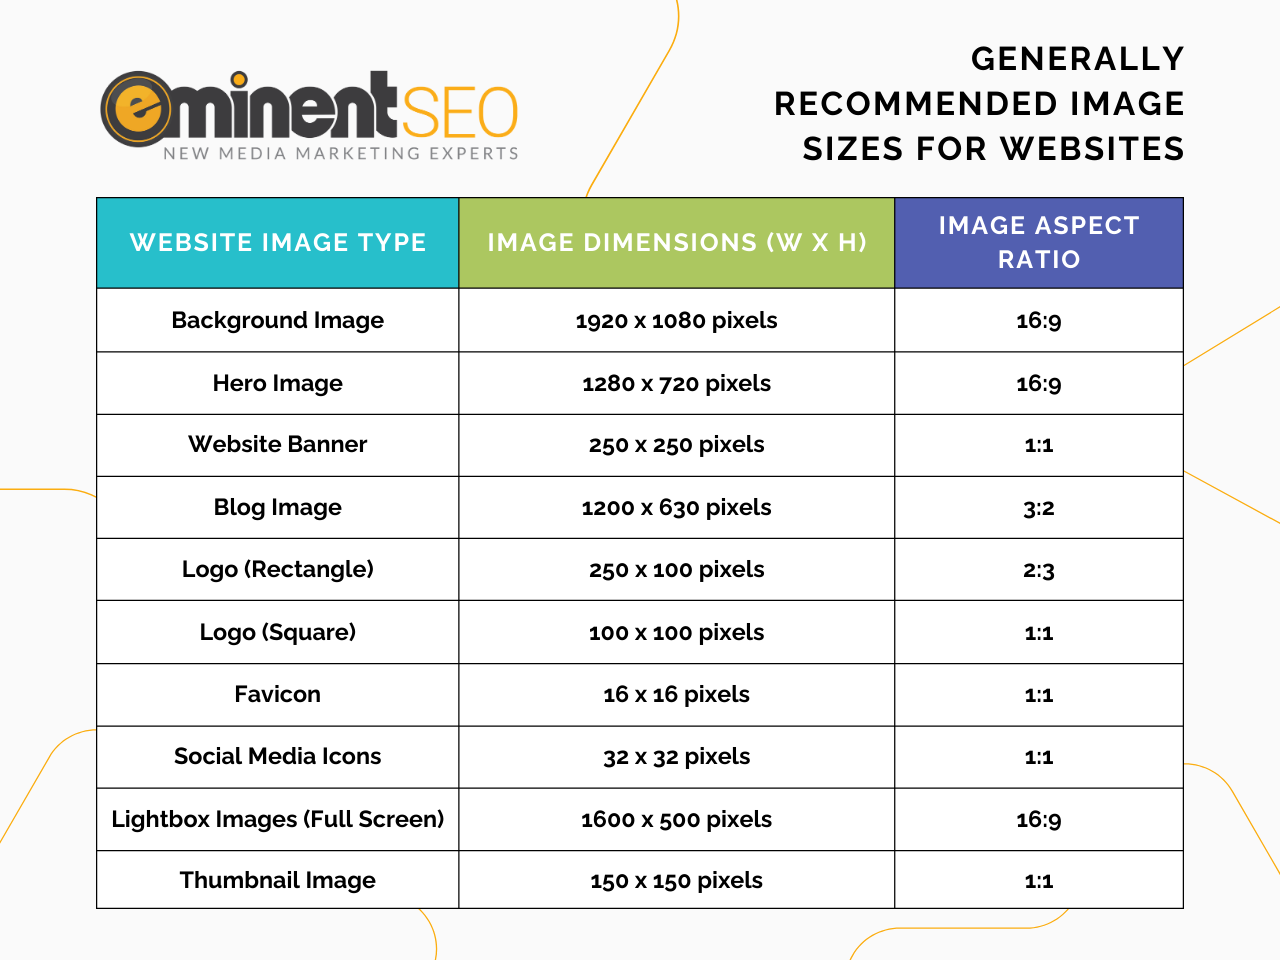 Generally recommended image sizes for websites